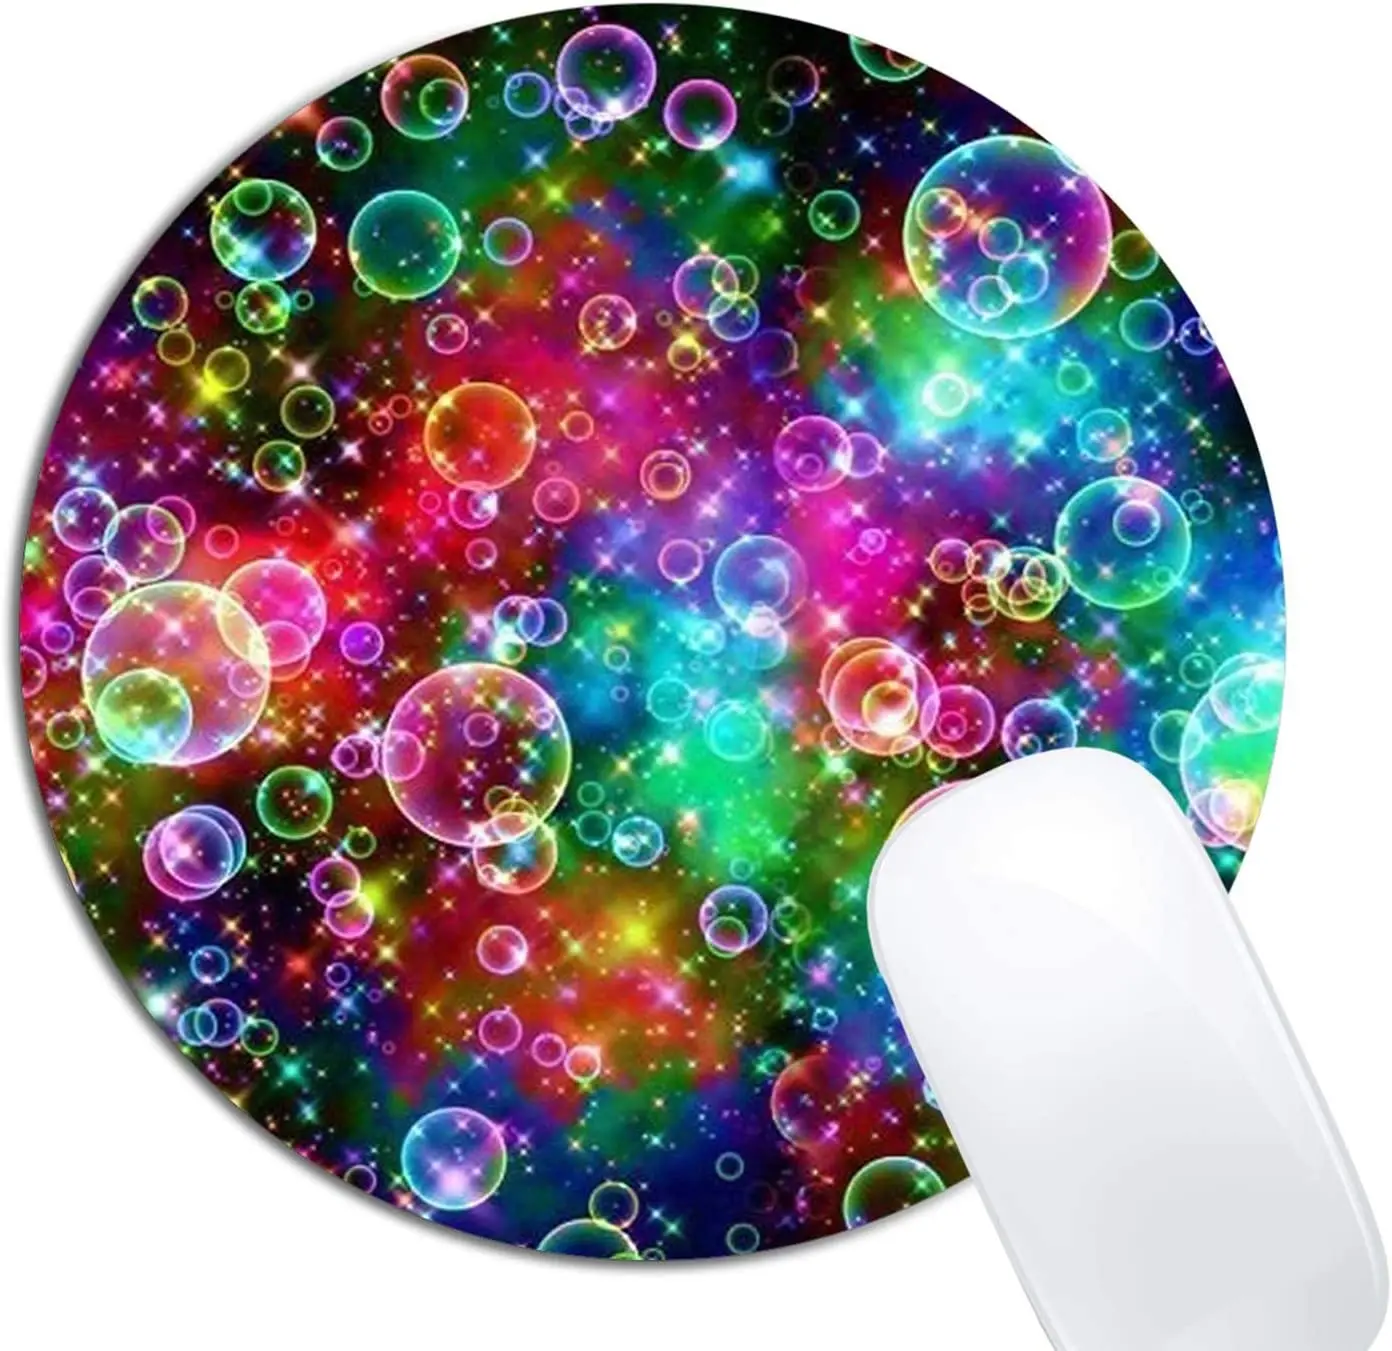 Colorful Bubbles Mouse Pad Round Non-Slip Rubber Mousepad Laptop Office Computer Decor Cute Desk Accessories Design Mouse Pad cute ghost purple extra large gaming mouse pad computer keyboard desk mat xxl large gamer mousepad laptop desk pad accessories